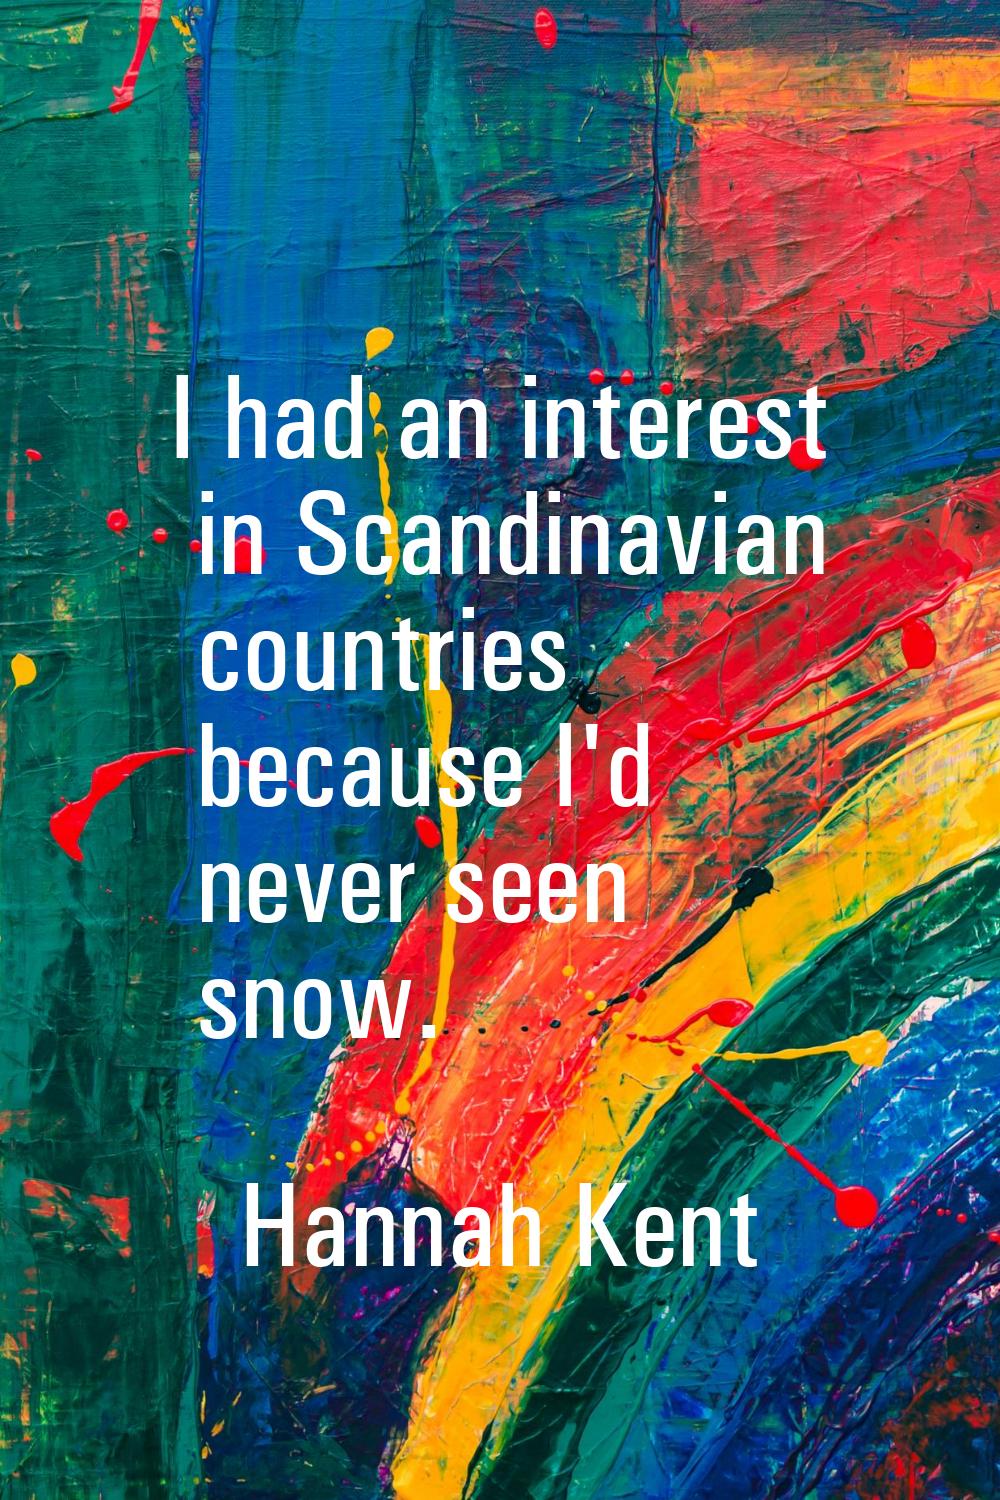 I had an interest in Scandinavian countries because I'd never seen snow.